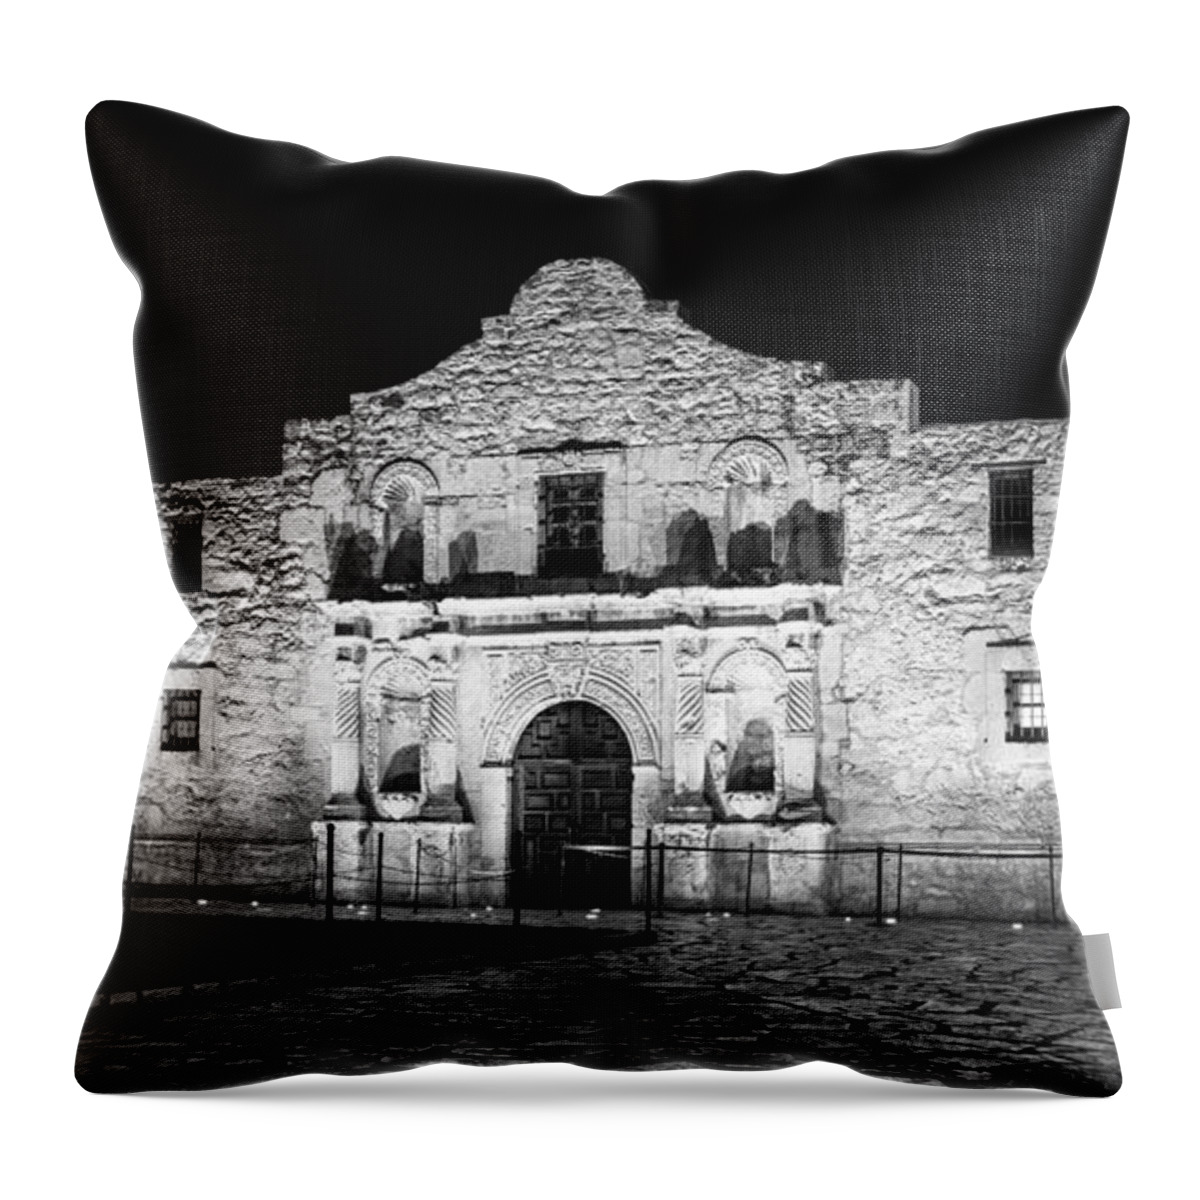 Alamo Throw Pillow featuring the photograph Remembering The Alamo - Black and White by Stephen Stookey